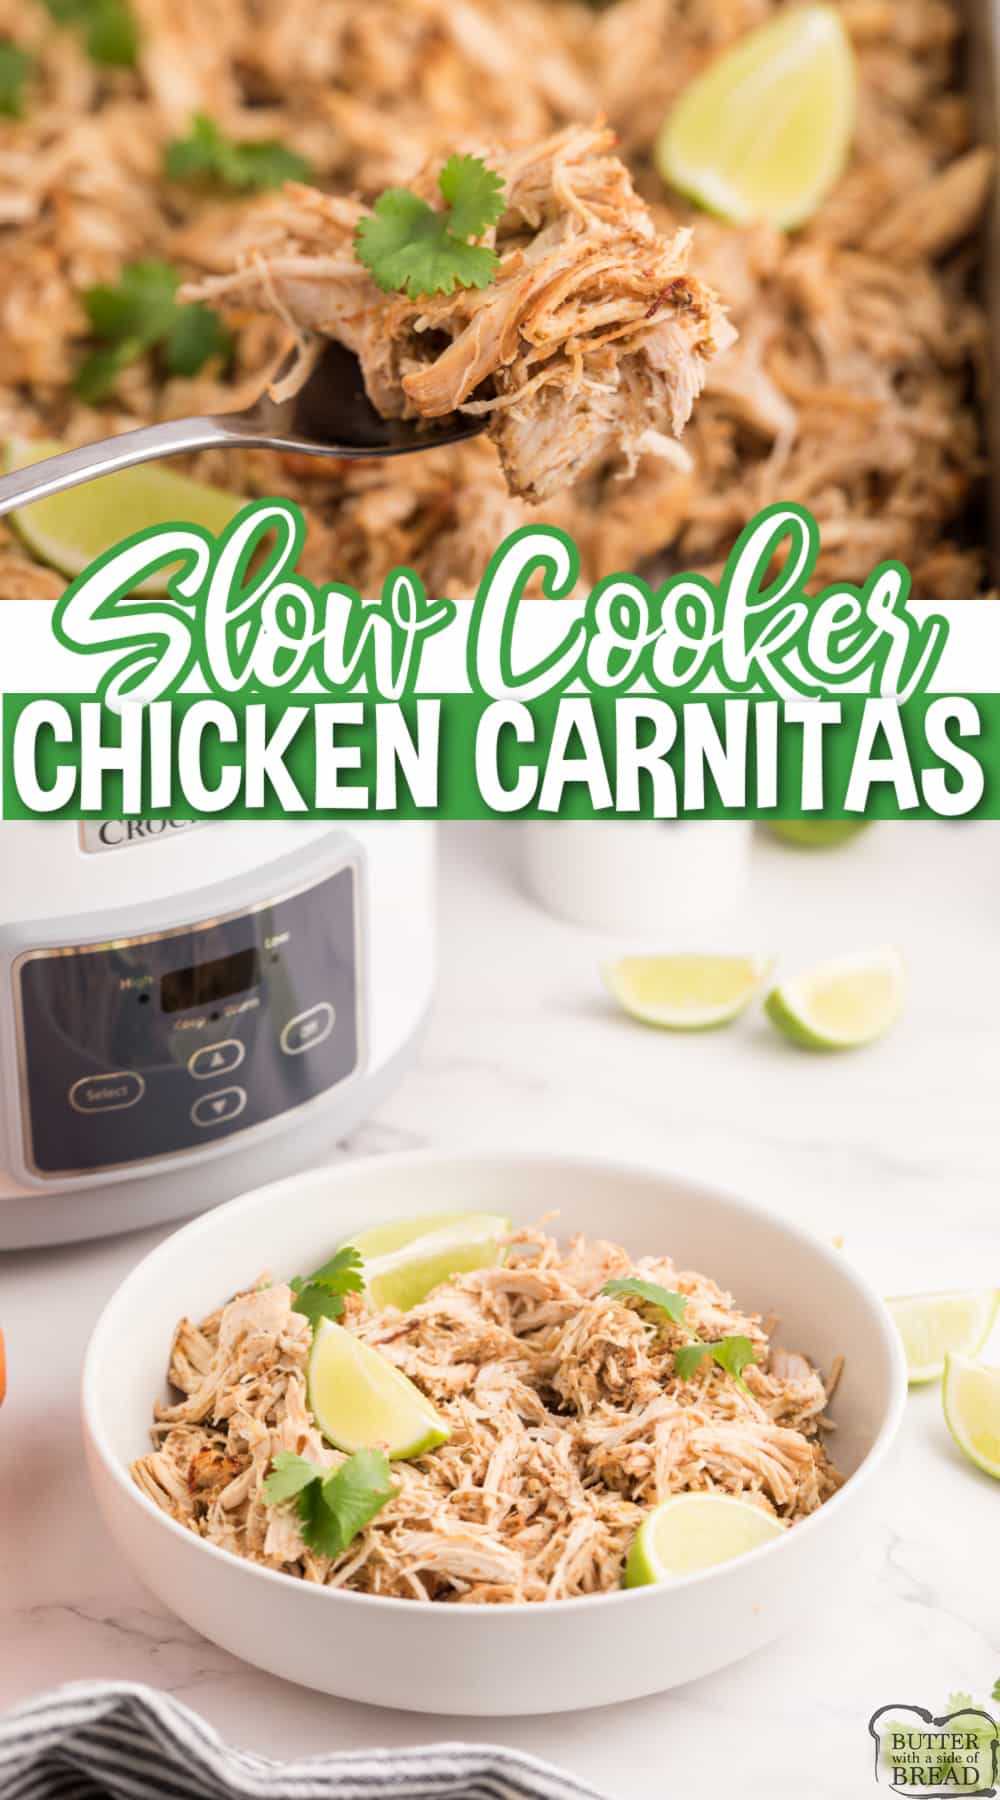 These Slow Cooker Chicken Carnitas are juicy, crispy, and absolutely packed with flavor.  Only 10 minutes of prep to make this delicious and healthy chicken recipe! Quick and easy dinner recipe that everyone loves!